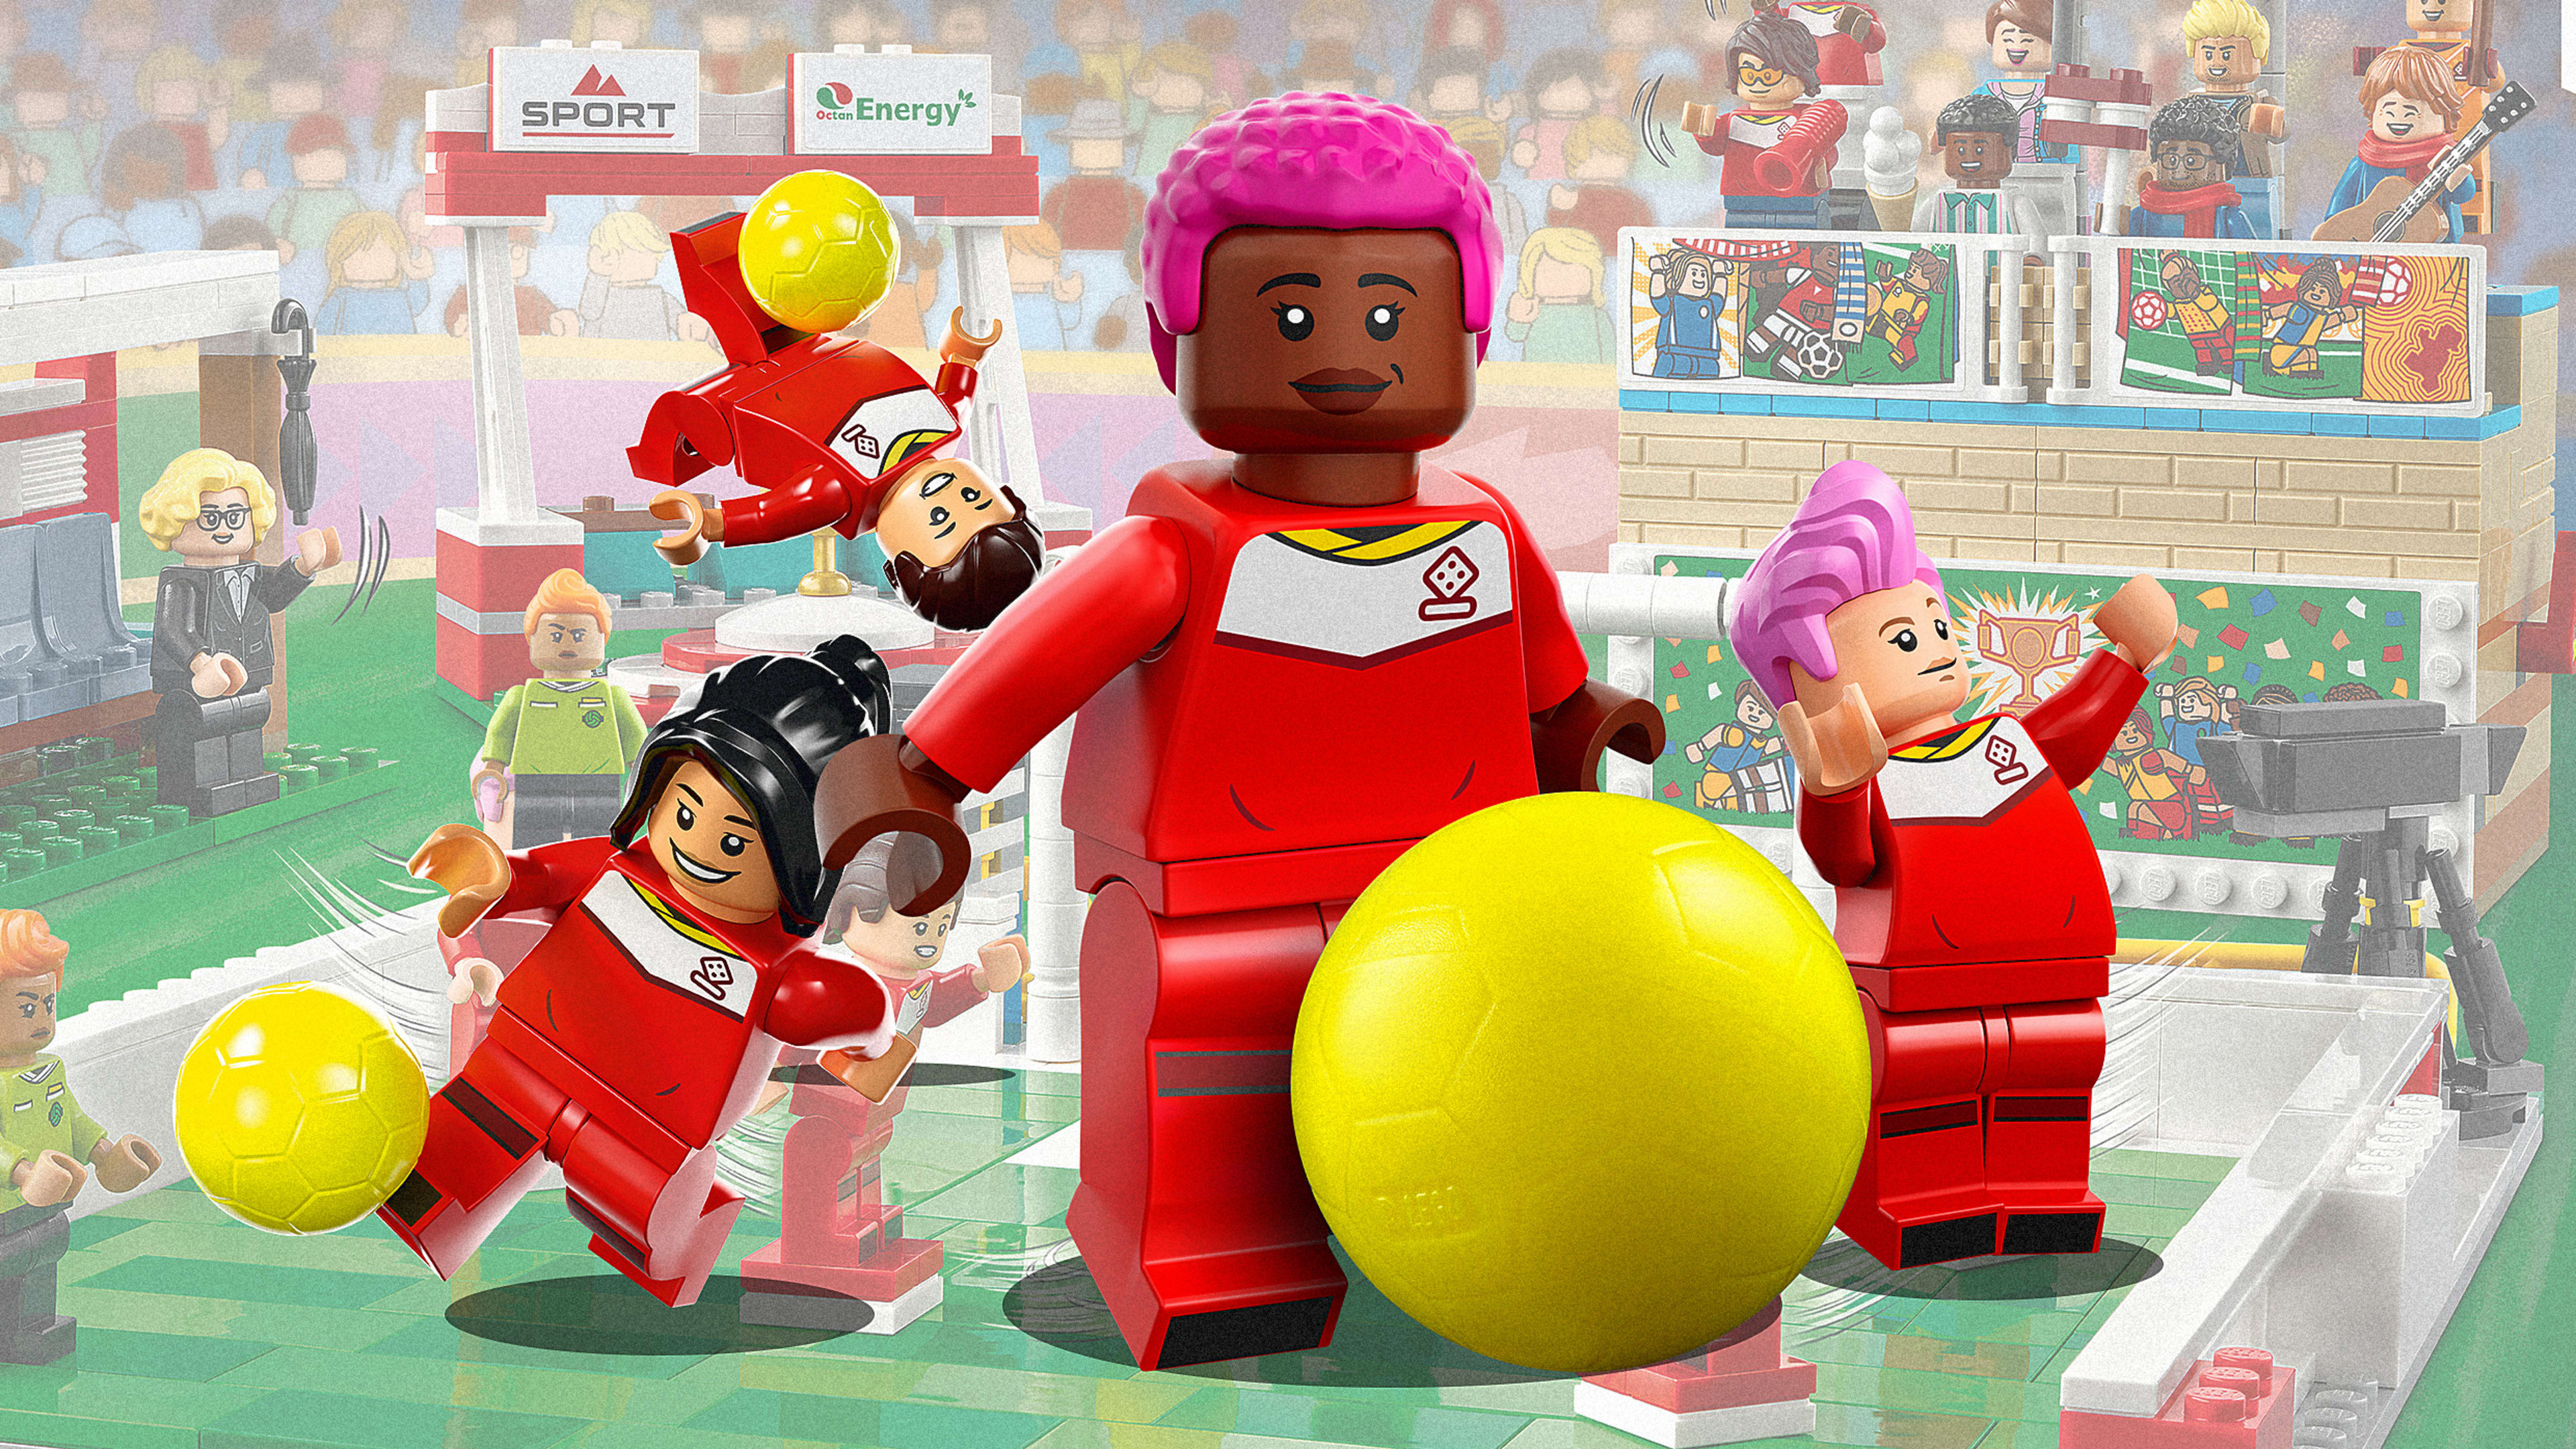 Lego’s new set celebrates professional women athletes for the first time